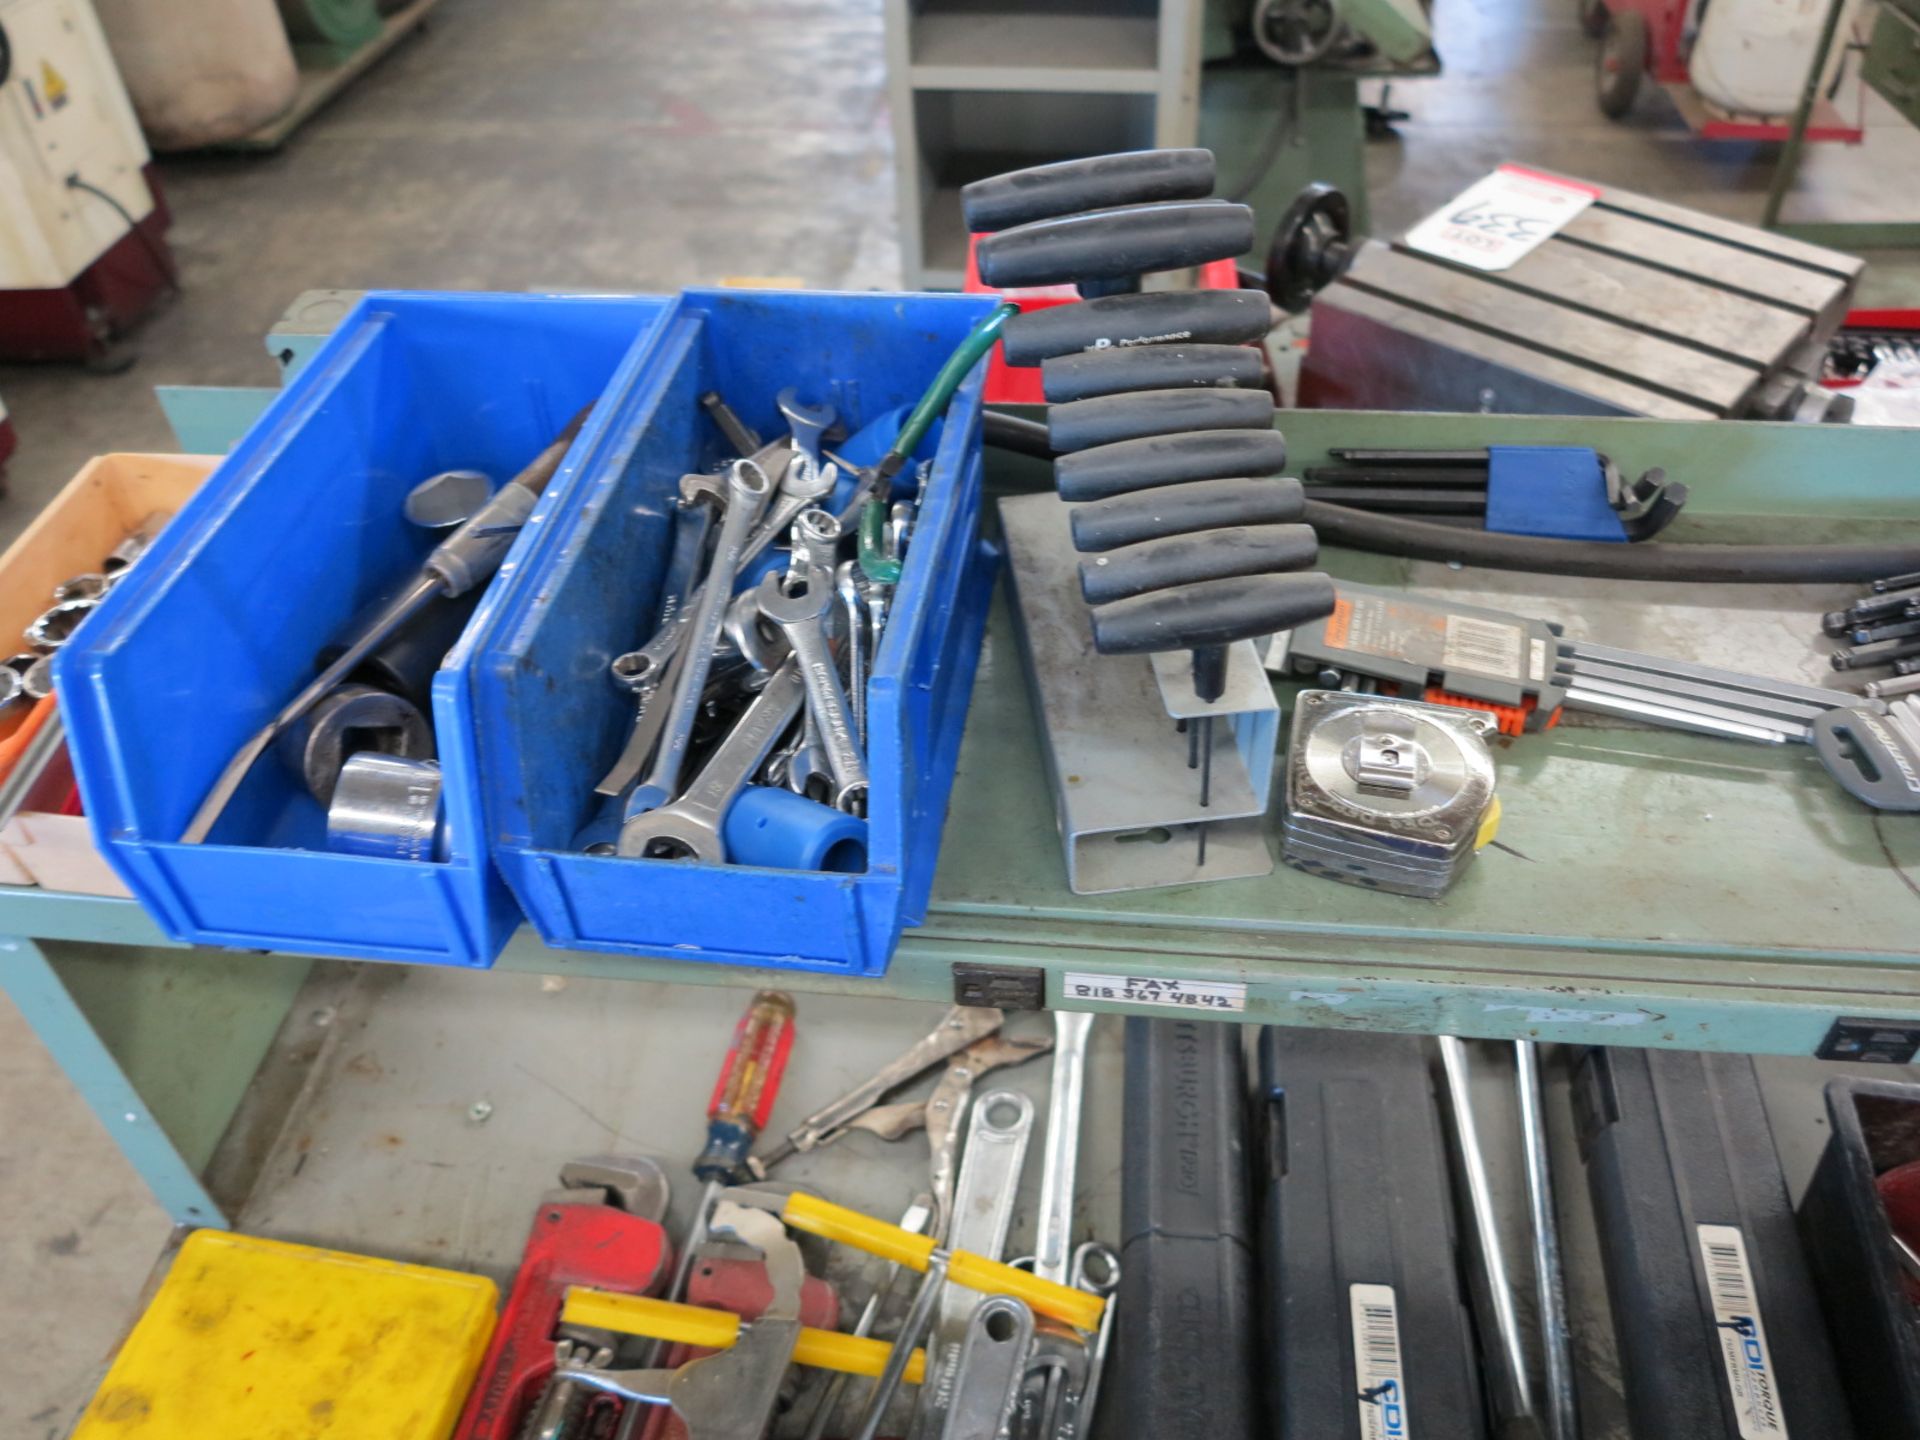 5' STEEL WORKBENCH WITH LARGE ASSORTMENT OF HAND TOOLS INCLUDING APPROX 5 TORQUE WRENCHES, ETC. - Image 2 of 5